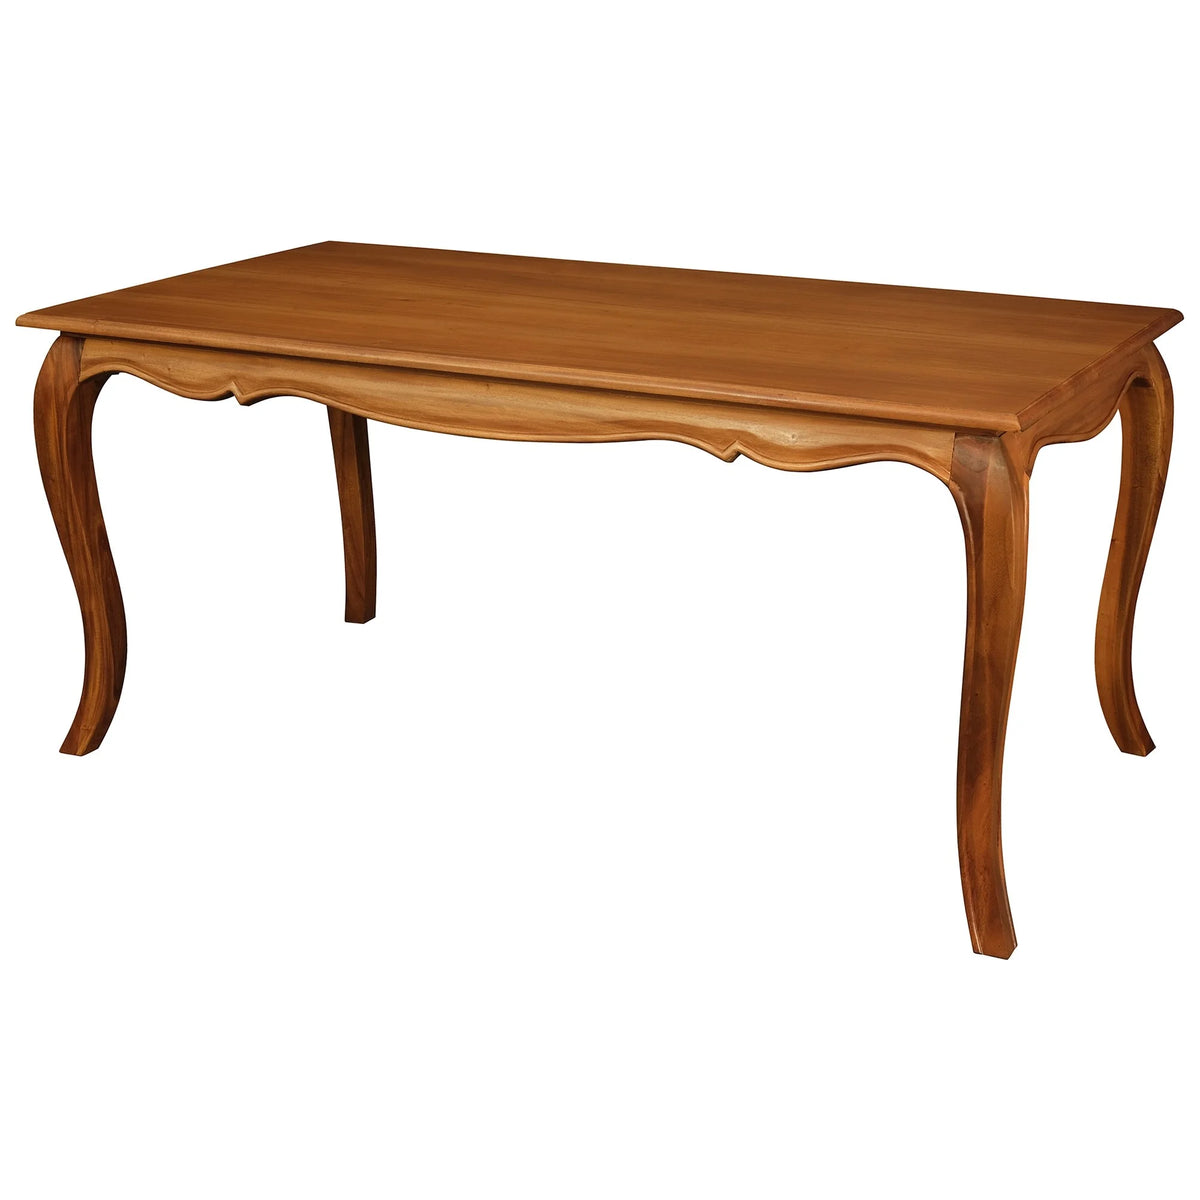 French Provincial Timber Dining Table - Light Pecan - Notbrand